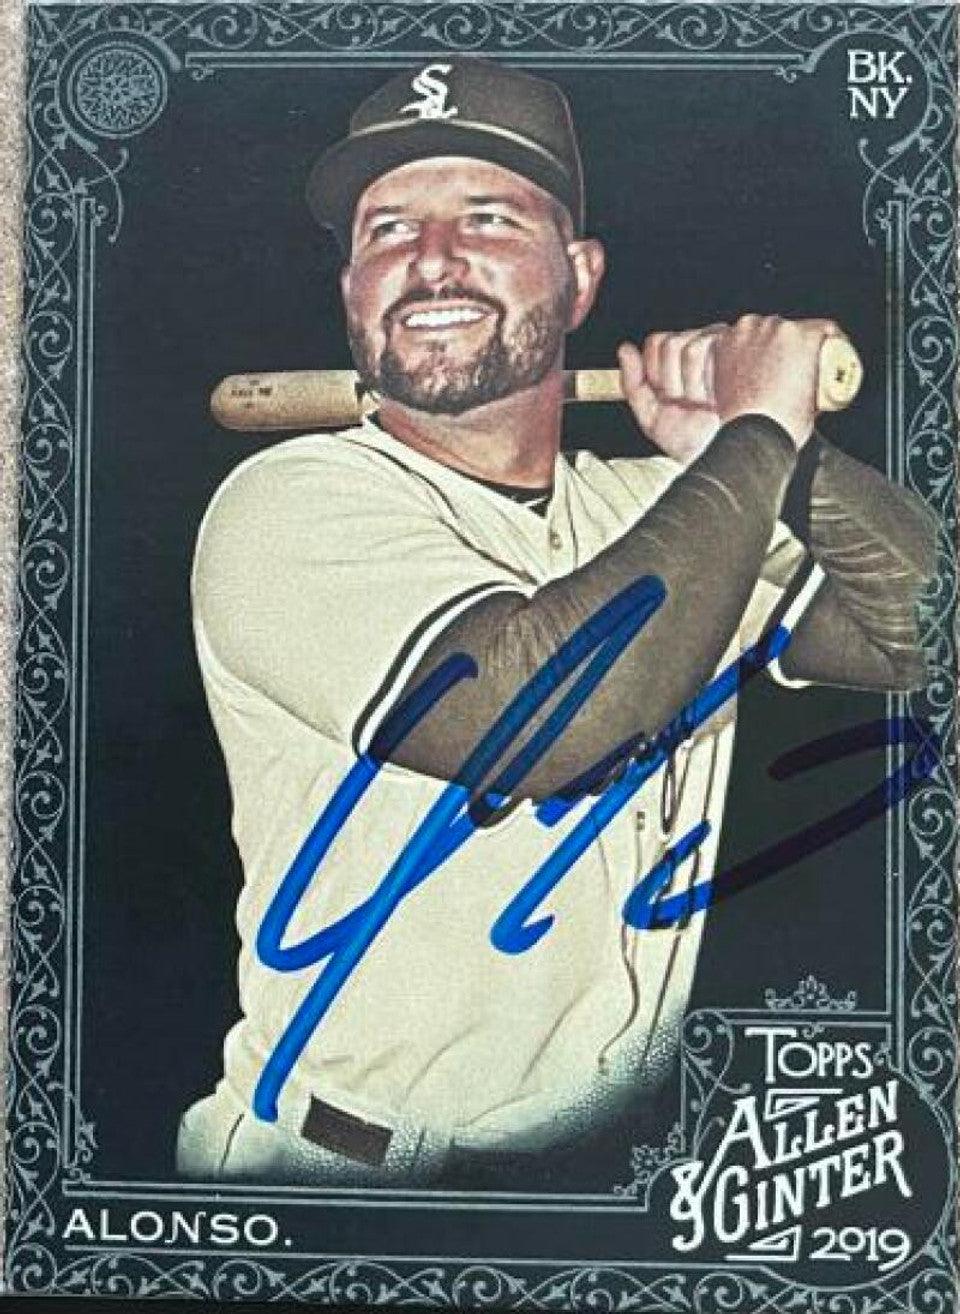 Yonder Alonso Signed 2019 Allen & Ginter X Baseball Card - Chicago White Sox - PastPros